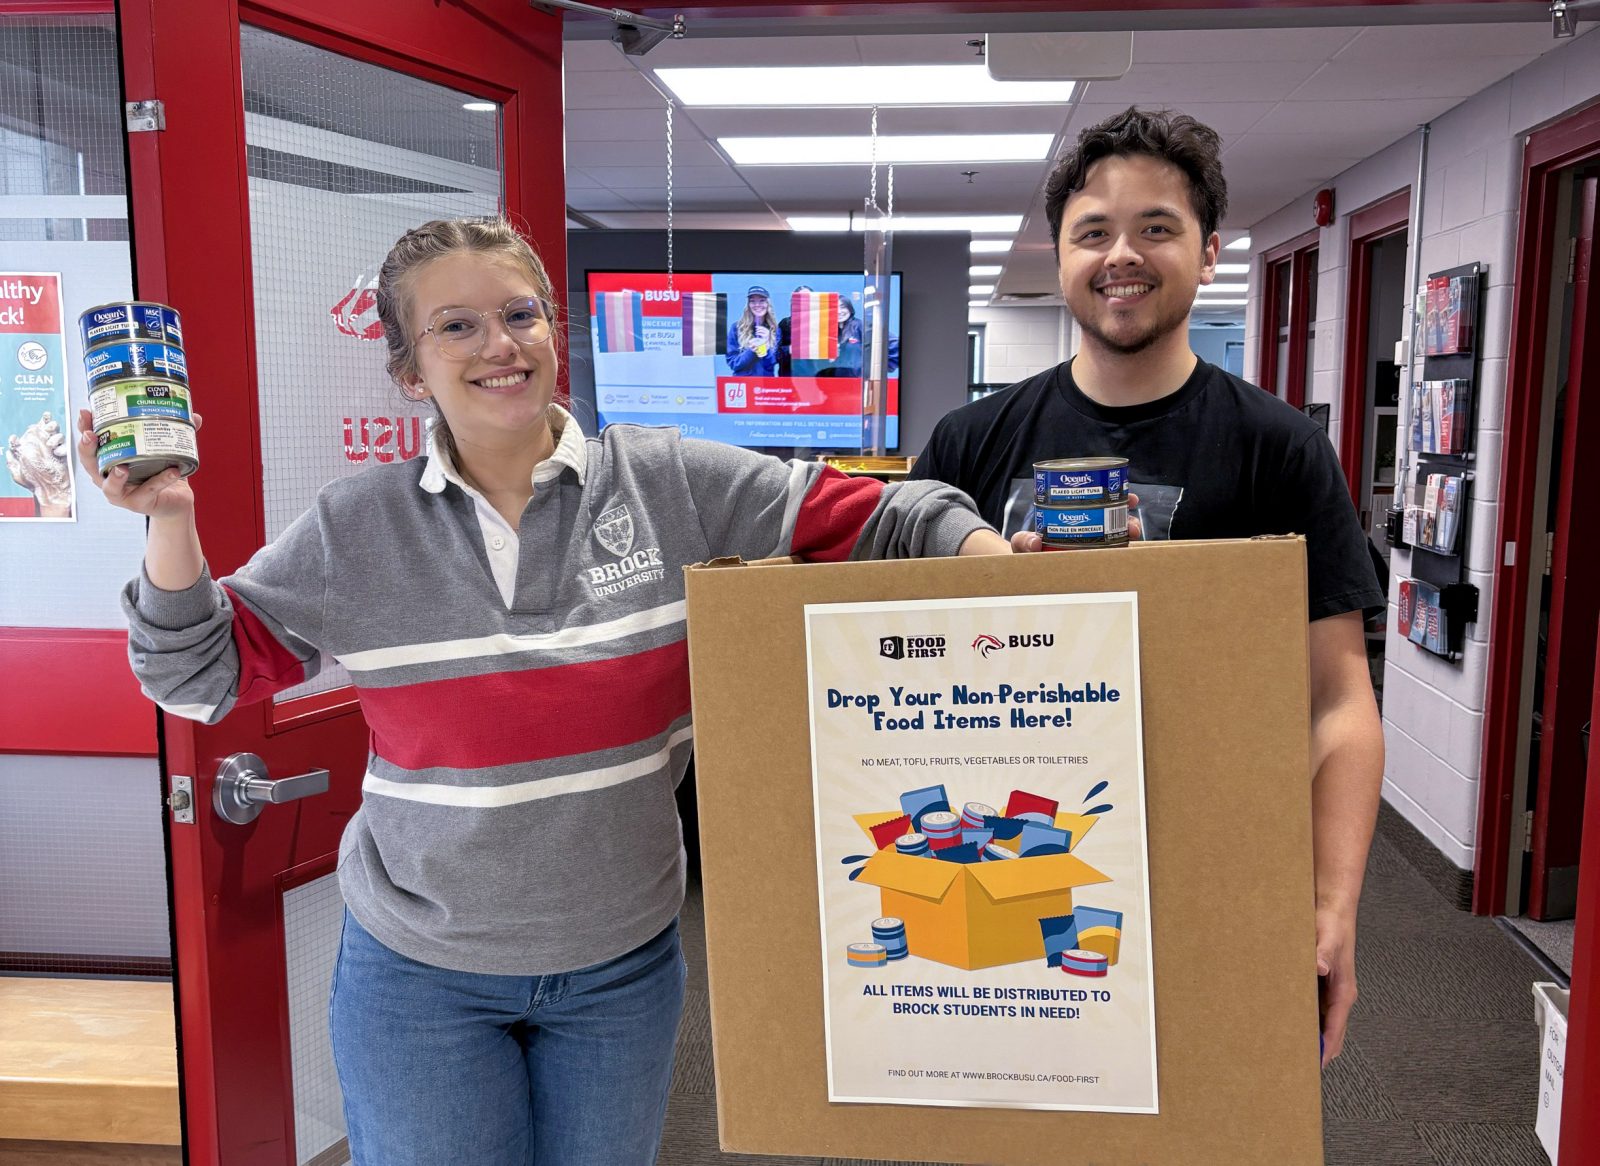 Two university students hold up a box and non-perishable food items for a photo.